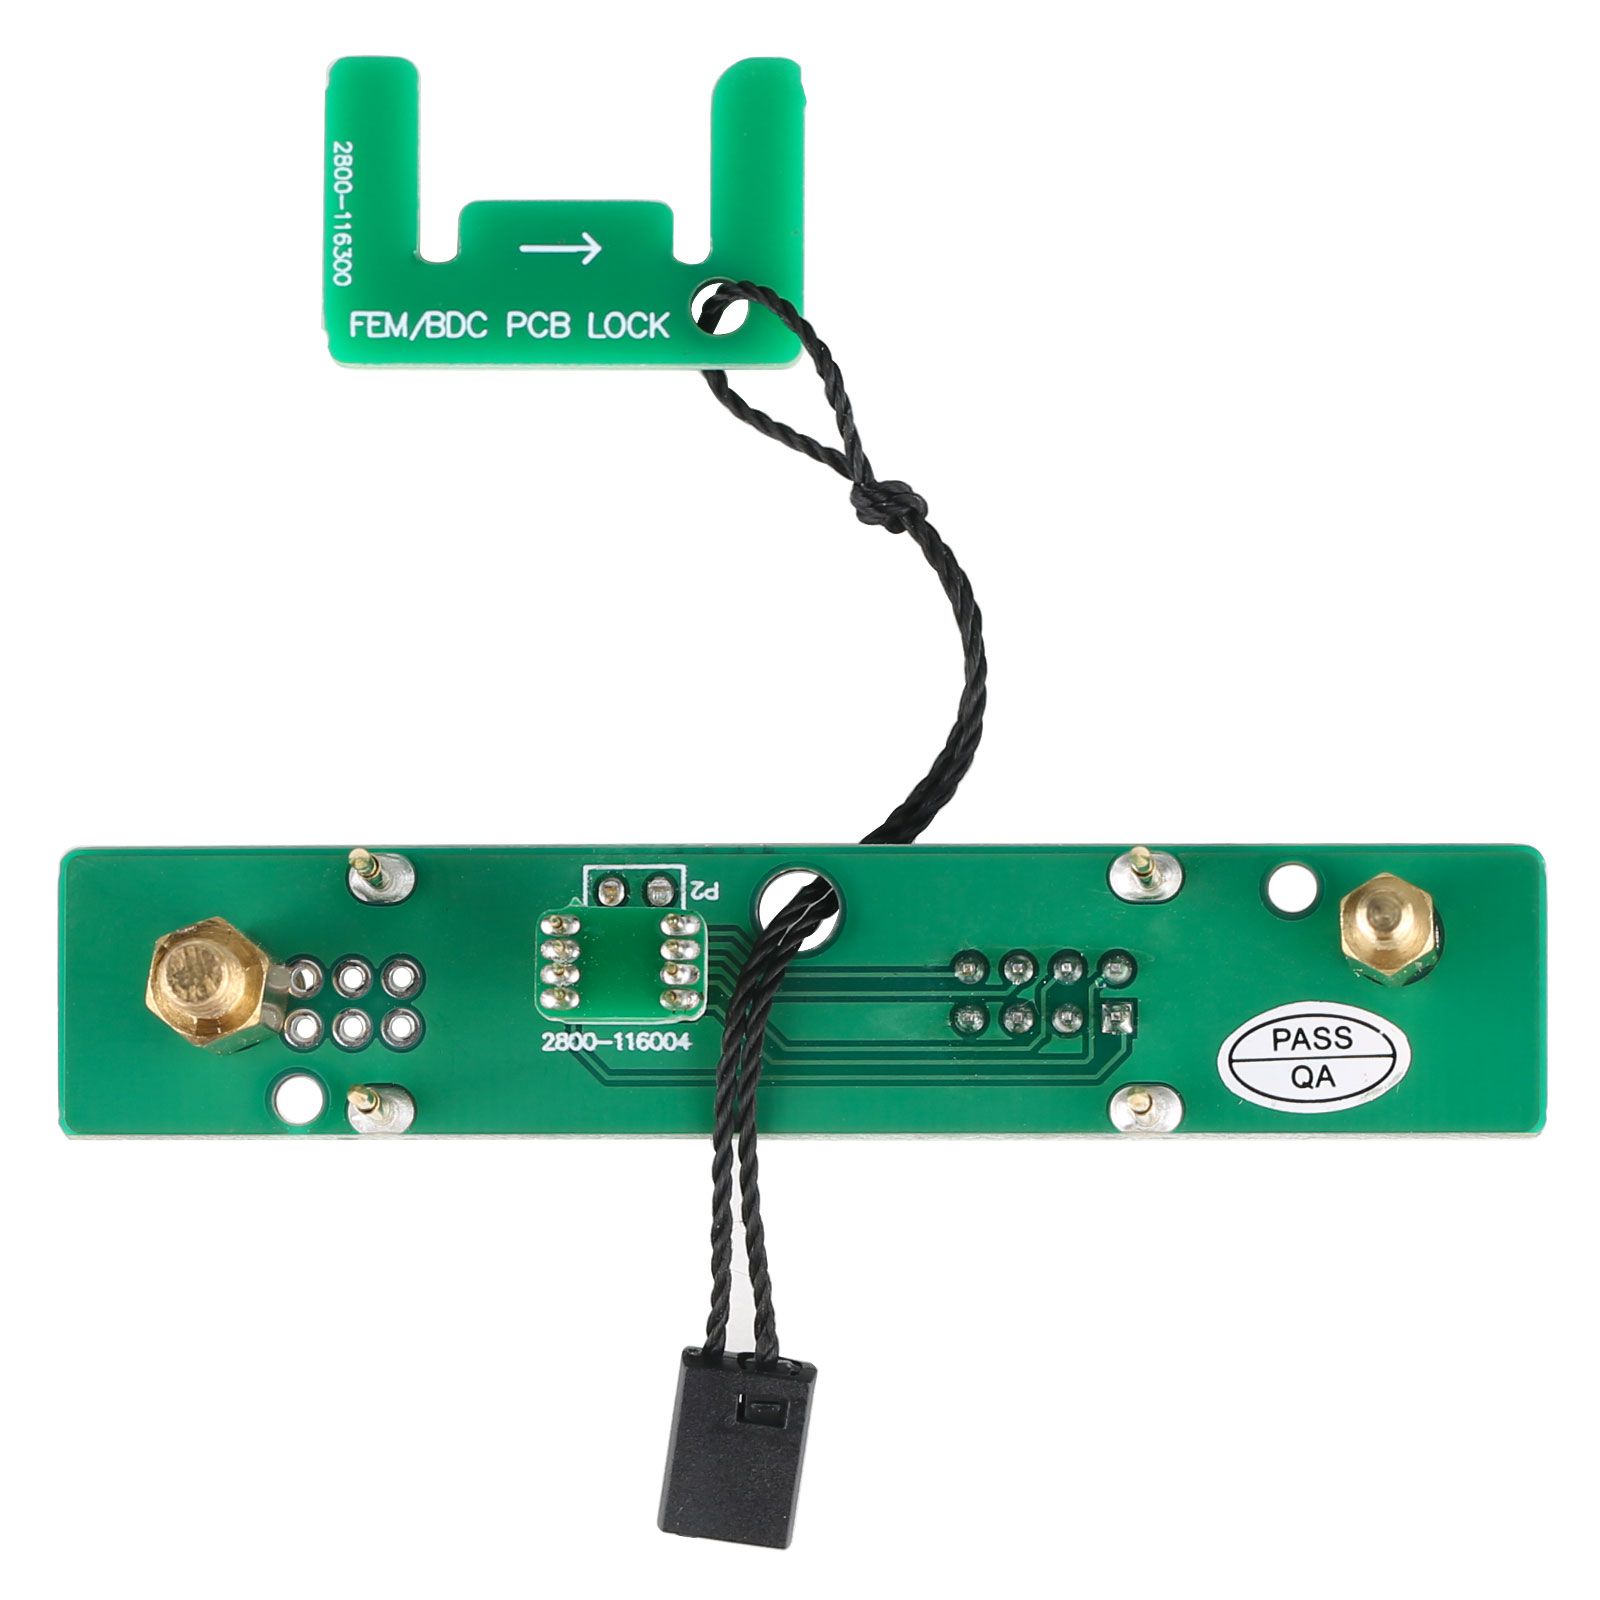 Yanhua FEM/BDC Special Programming Clip for 95128/95256 Chip Work with Yanhua ACDP/CGDI/VVDI/Autel/Launch X431